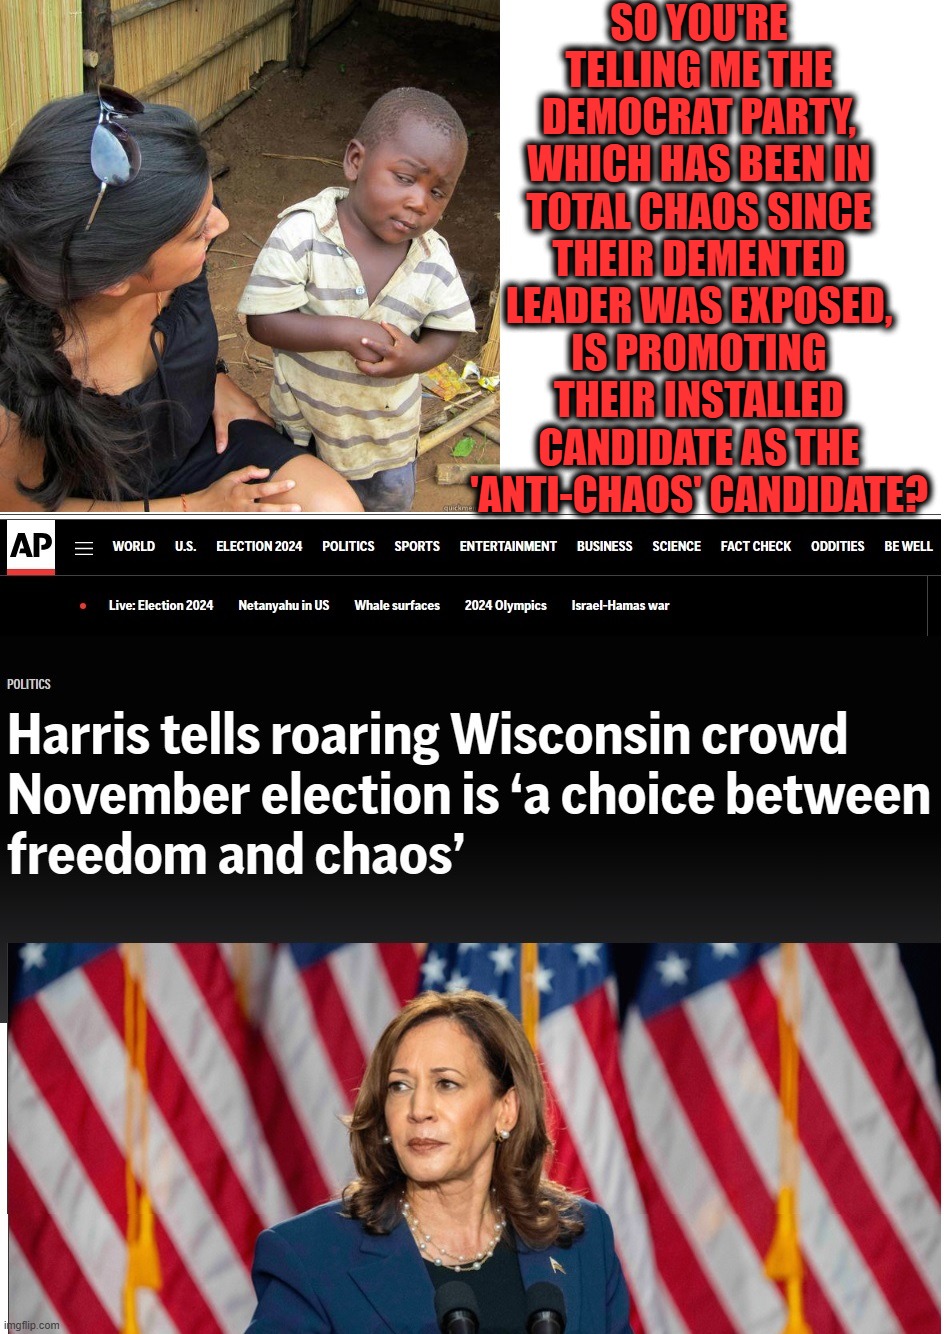 Kamala Harris: the QUEEN of CHAOS | SO YOU'RE TELLING ME THE DEMOCRAT PARTY, WHICH HAS BEEN IN TOTAL CHAOS SINCE THEIR DEMENTED LEADER WAS EXPOSED, IS PROMOTING THEIR INSTALLED CANDIDATE AS THE 'ANTI-CHAOS' CANDIDATE? | image tagged in liberal media,liberal hypocrisy,liberal logic,hollywood liberals,stupid liberals,harris | made w/ Imgflip meme maker